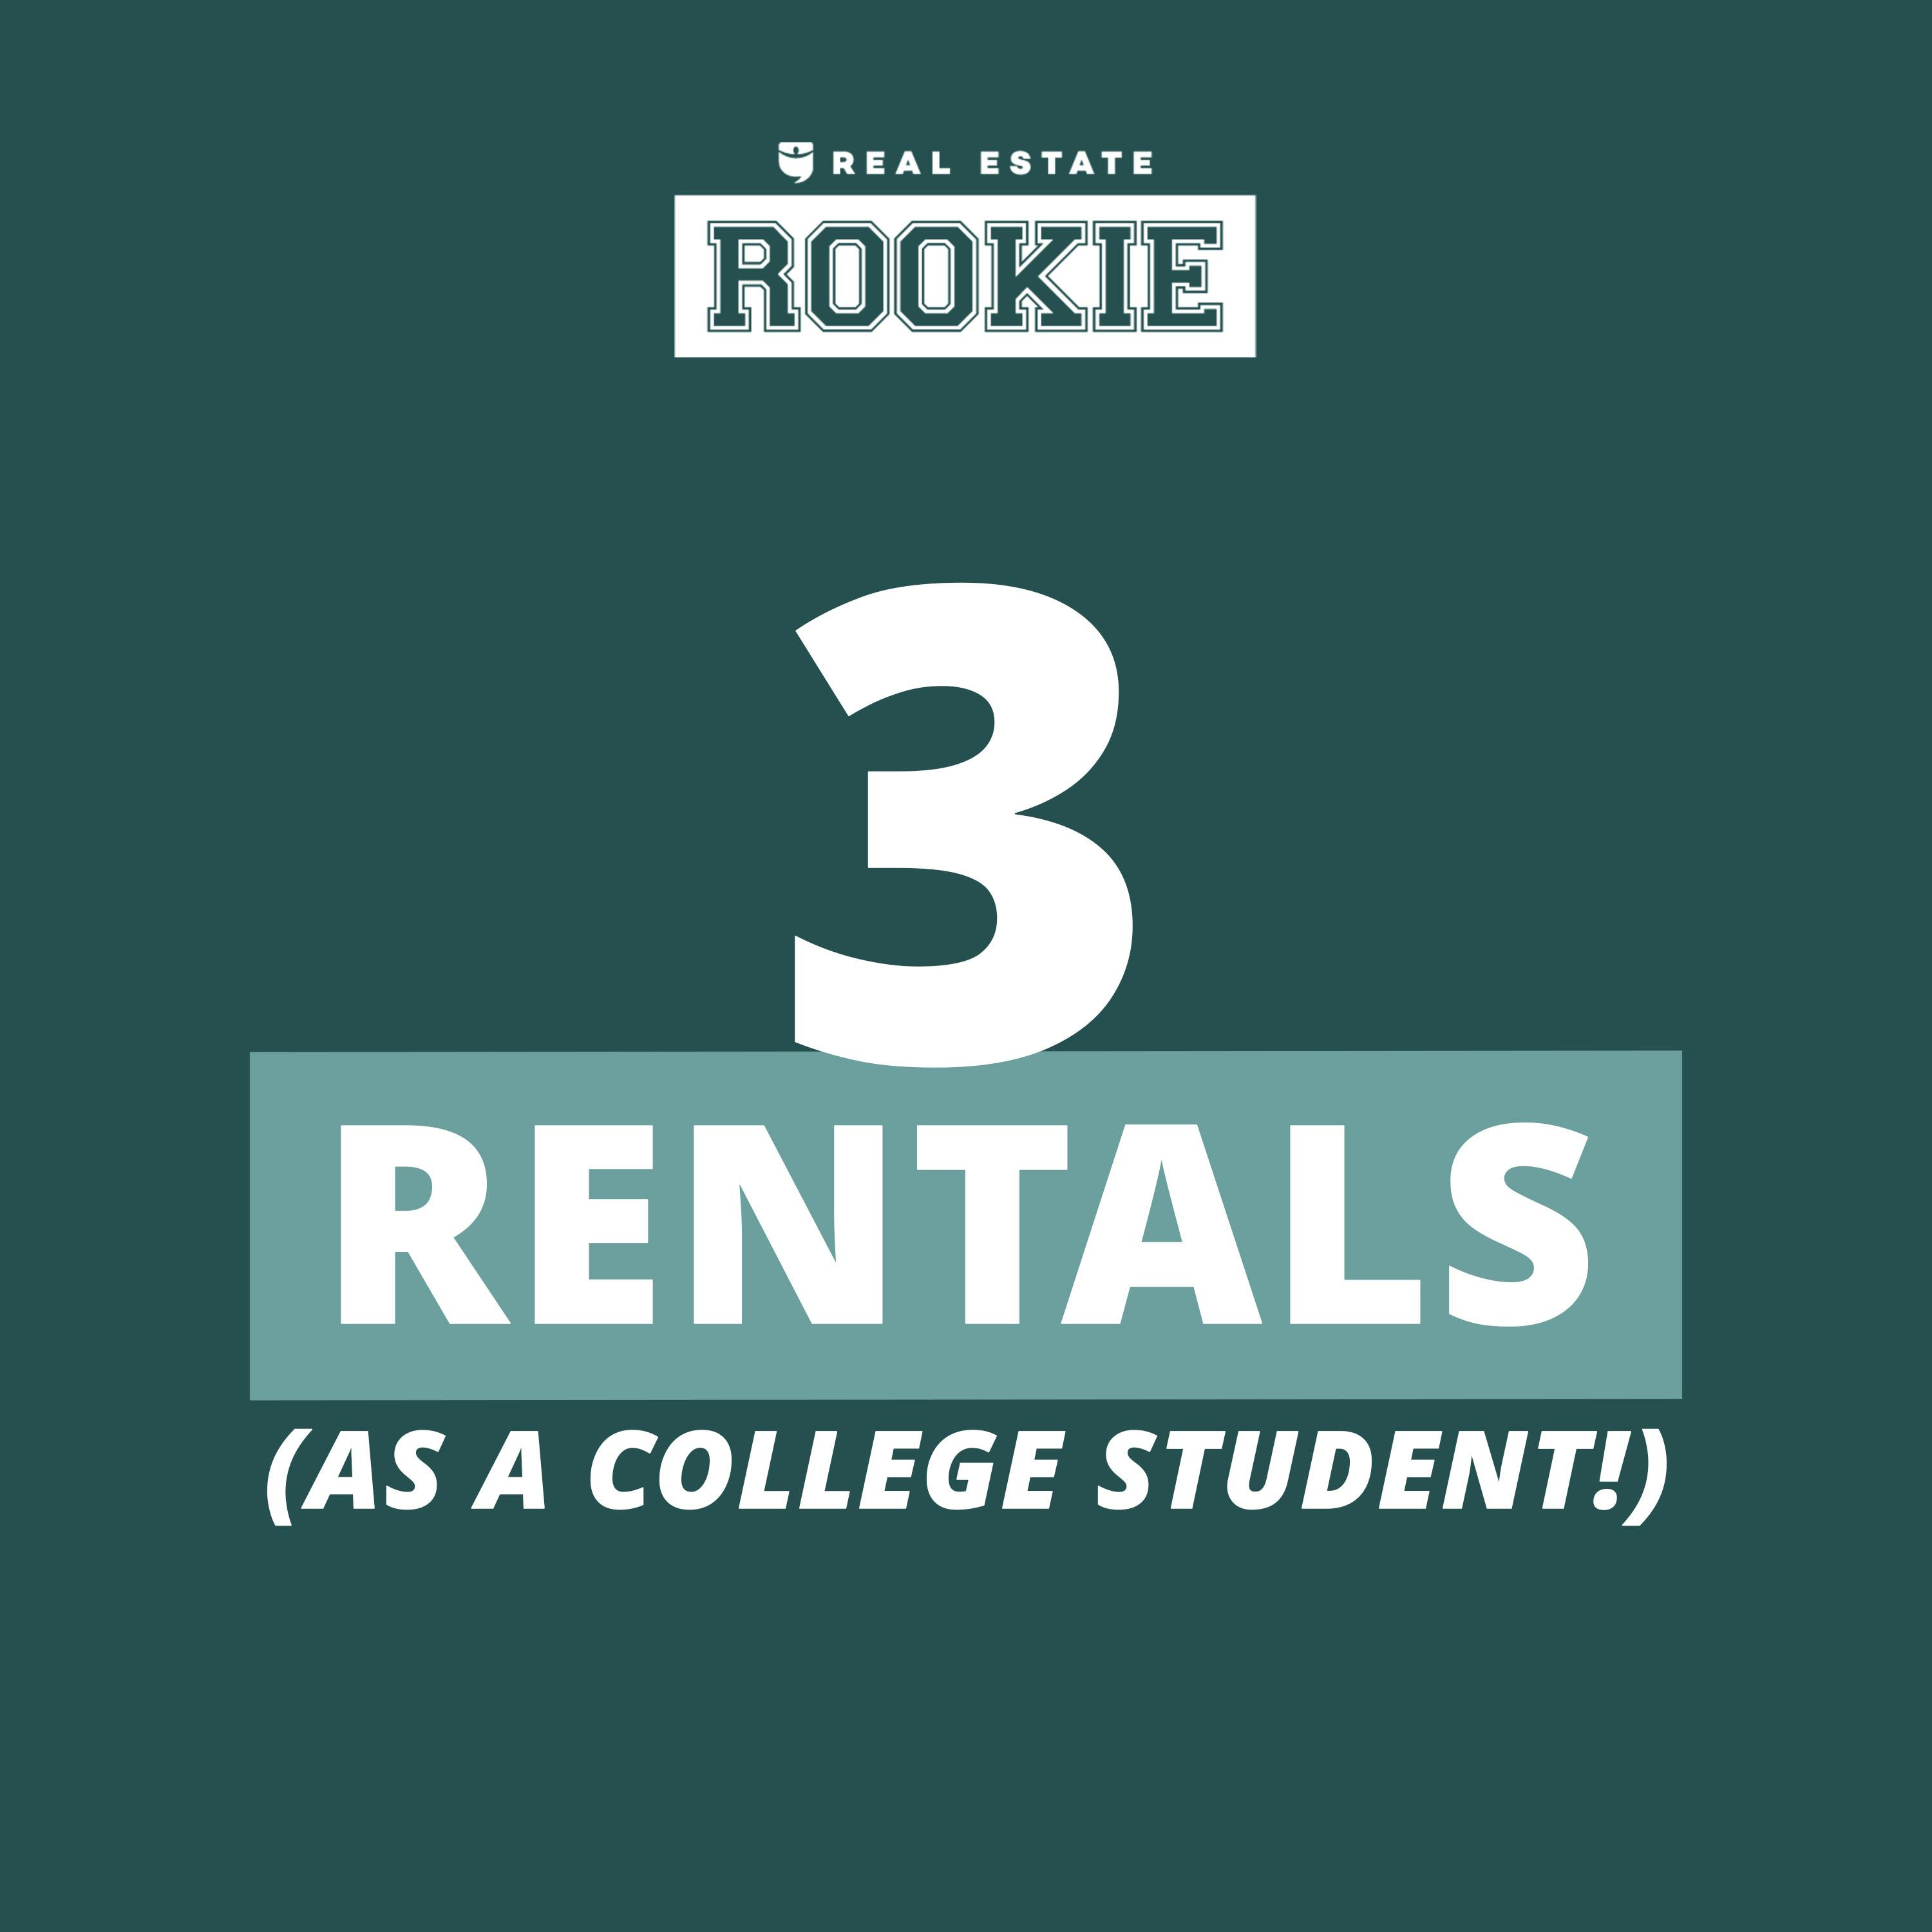 285: 3 Rentals (While in College!) and Turning a Horrific House into a Cash Cow